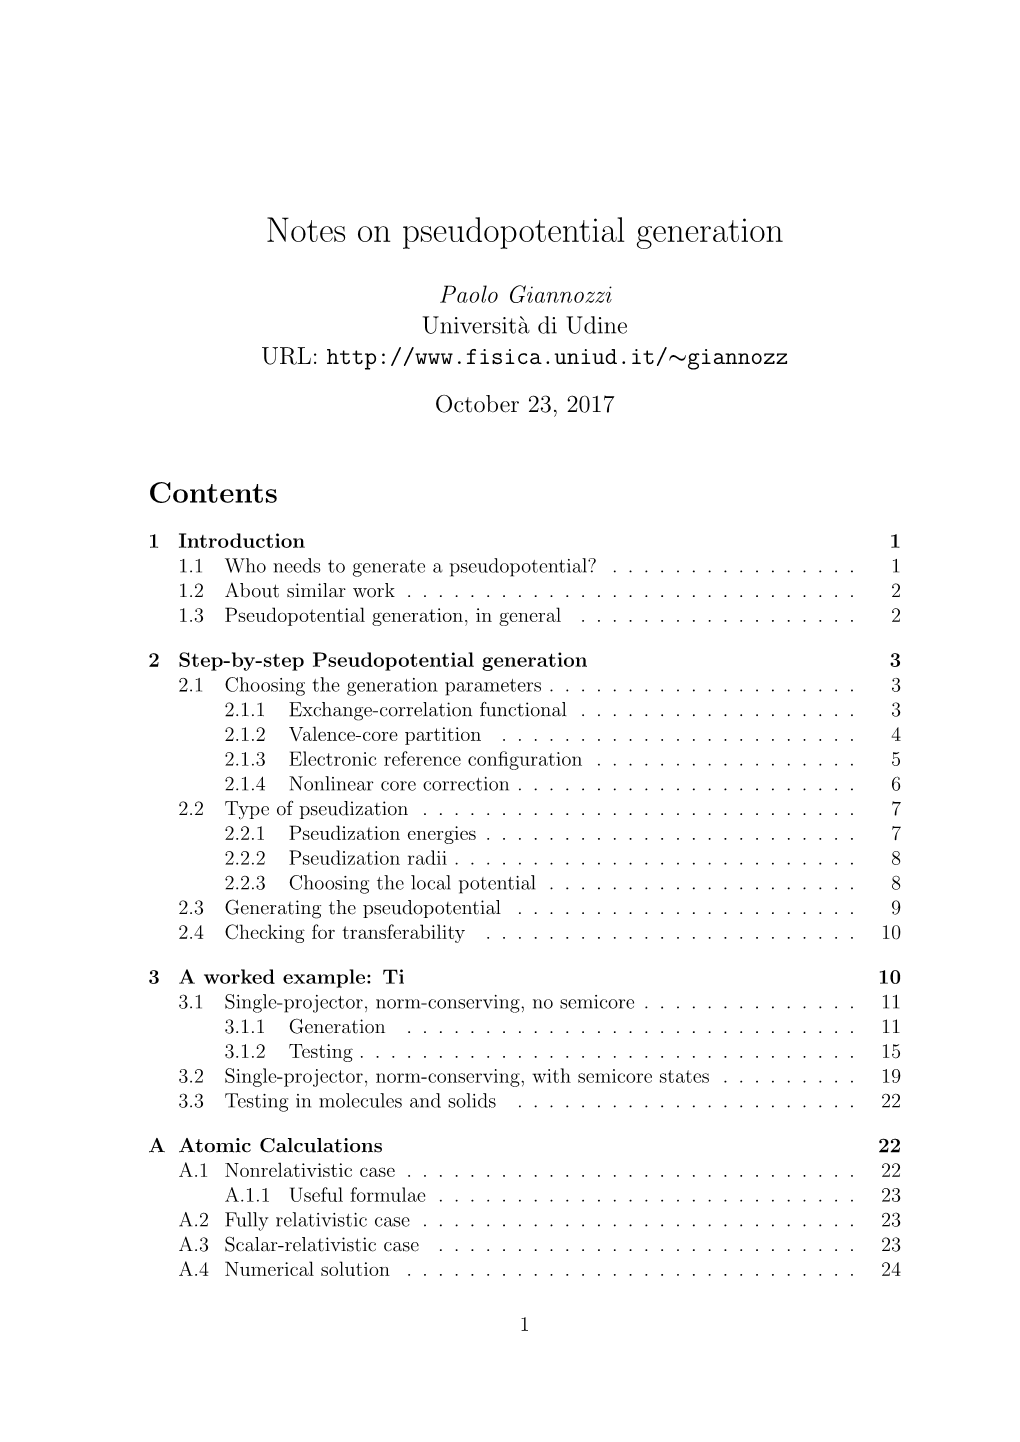 Notes on Pseudopotential Generation